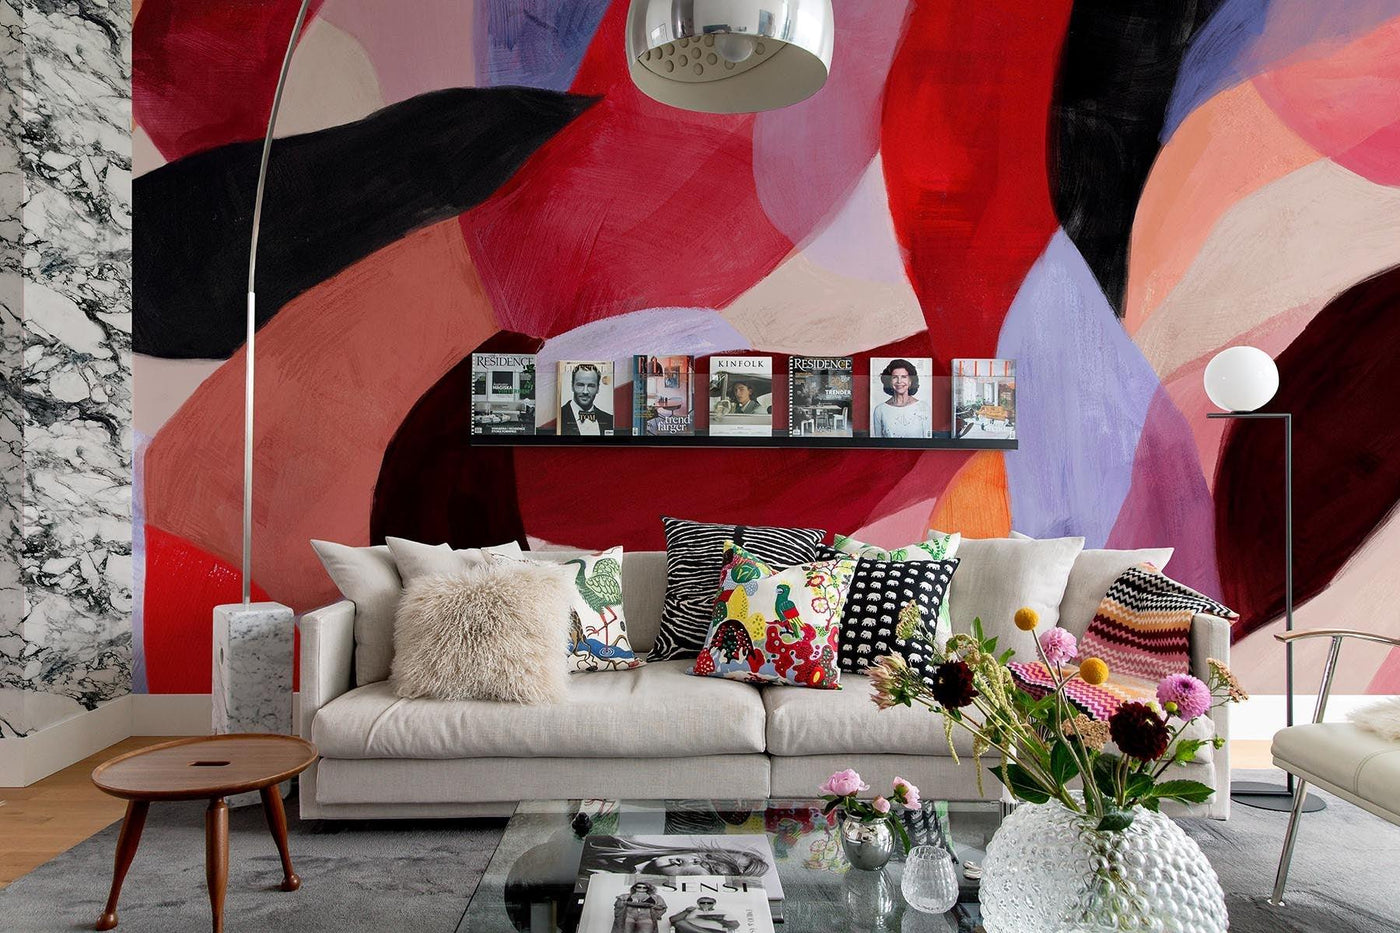 Multicolored artistic wall mural in red tones in this minimalistic living room. Glastable. Arco lamp. wooden stool. Grey rugg on a wooden floor. Graphic pillow in the sofa